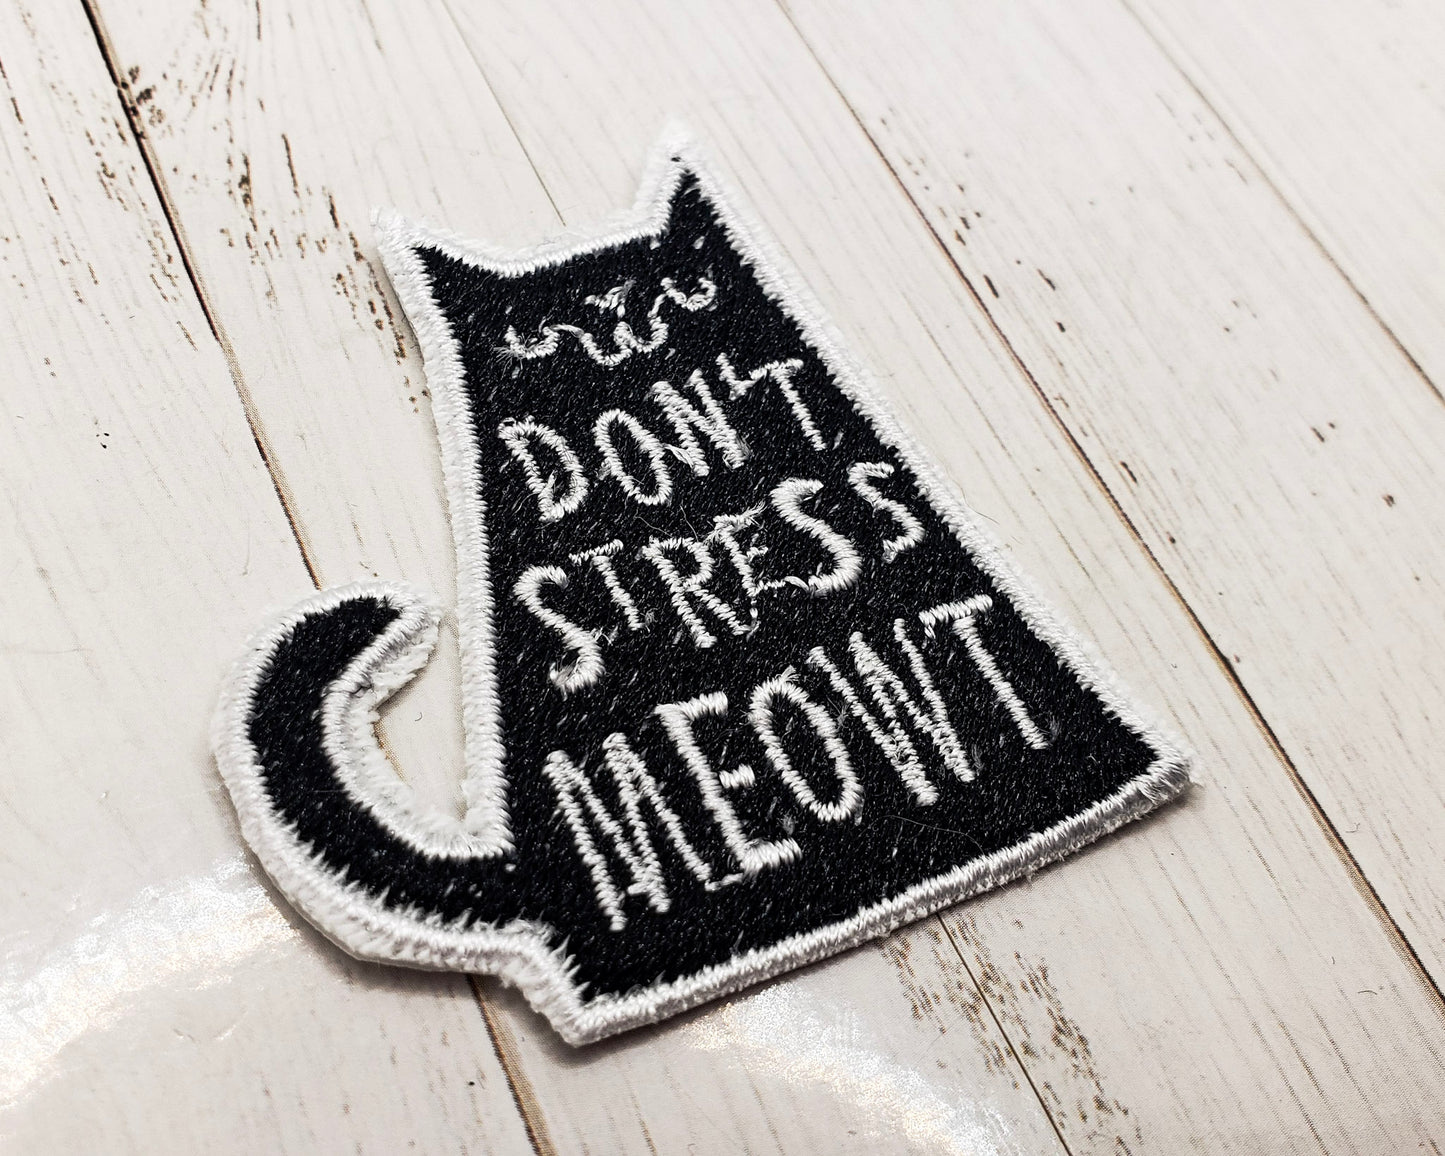 Don't Stress Meowt Cat Embroidered Iron On Patch